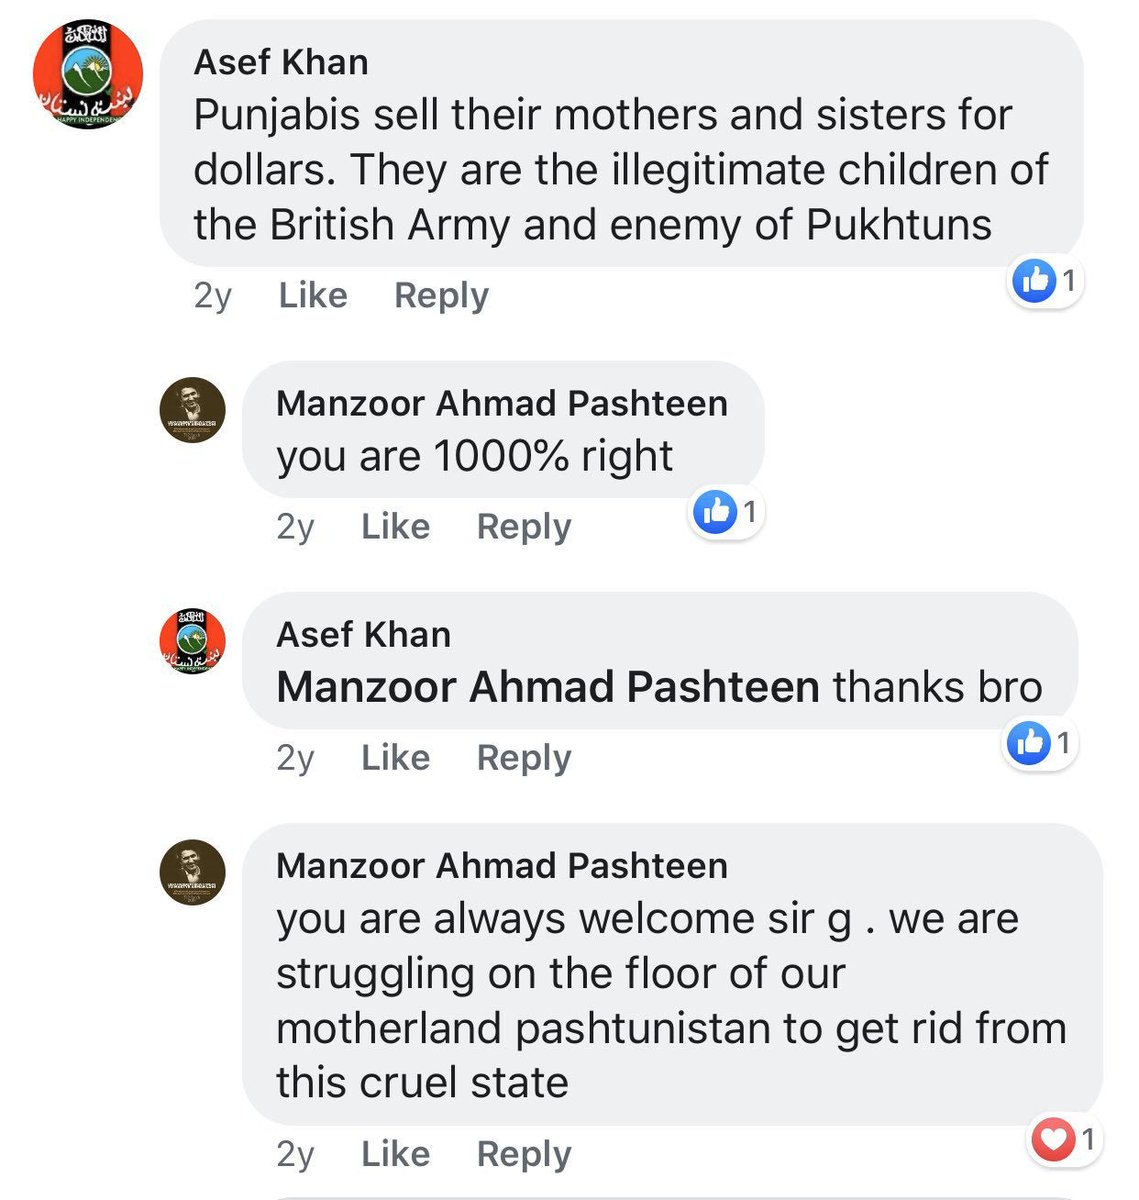 Thread :"Punjabis are the Killer" of Afghans & Pashtuns" :Fact & Fiction.On social media, PTM supporters and Afghans blame Punjabis for the current situation in Afghanistan & they call Pakistan "Punjabistan" to make such slogans and hate speech more effective.(1/18)